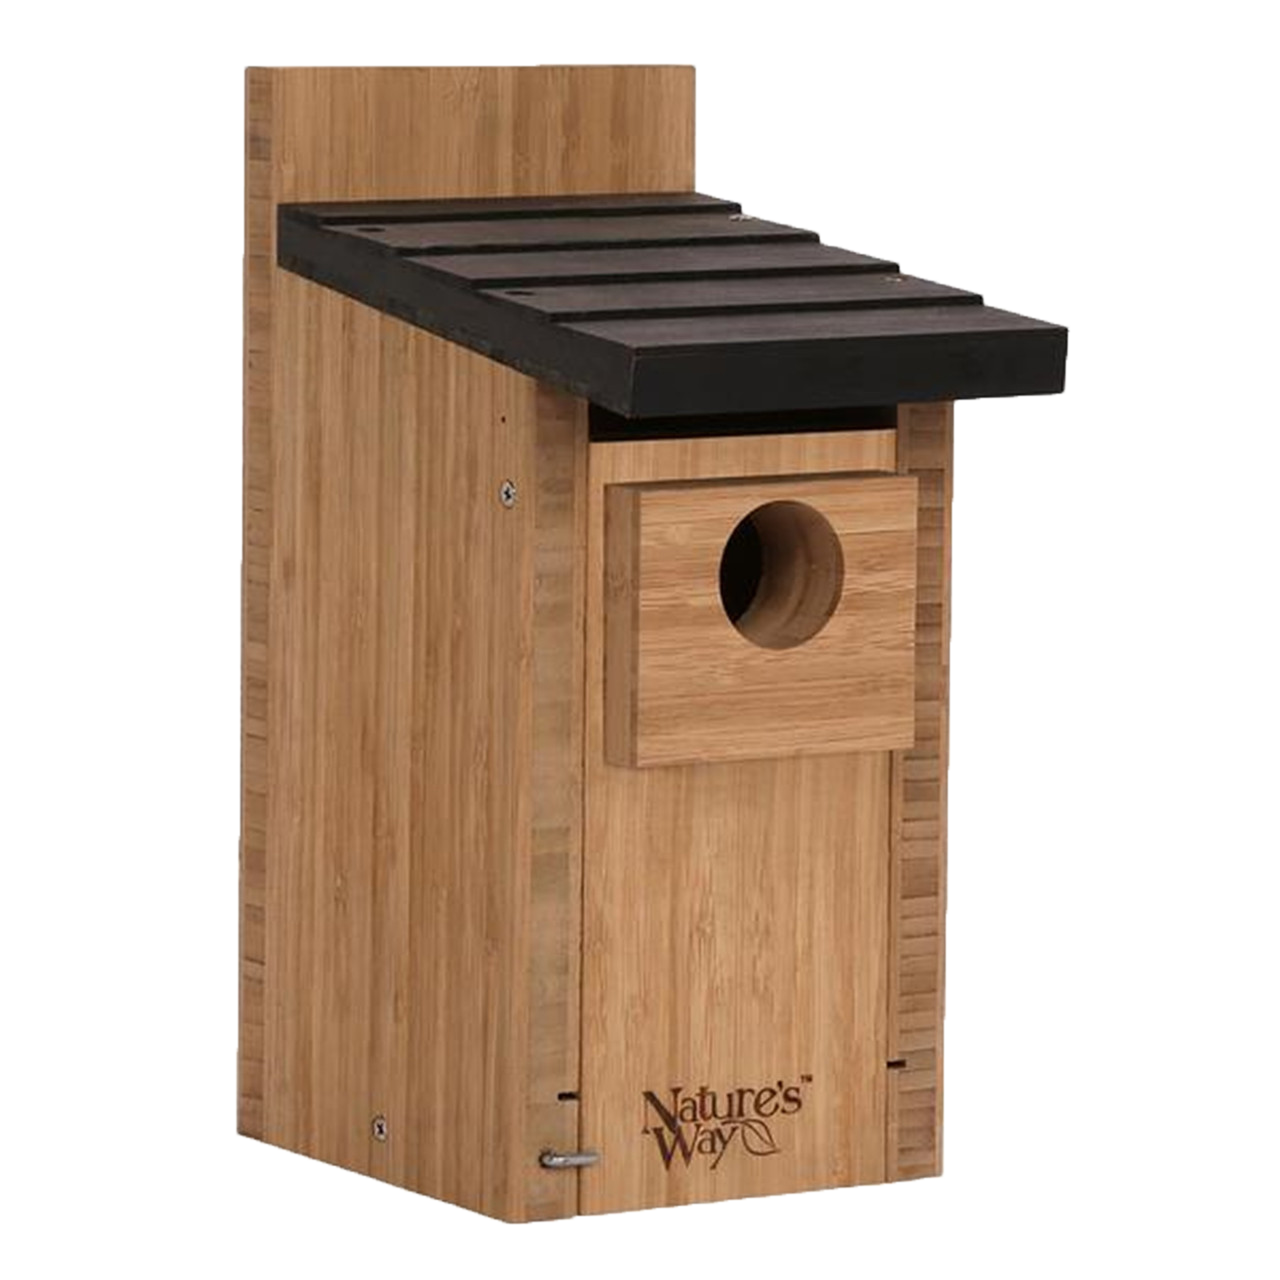 Shop our selection of bird houses